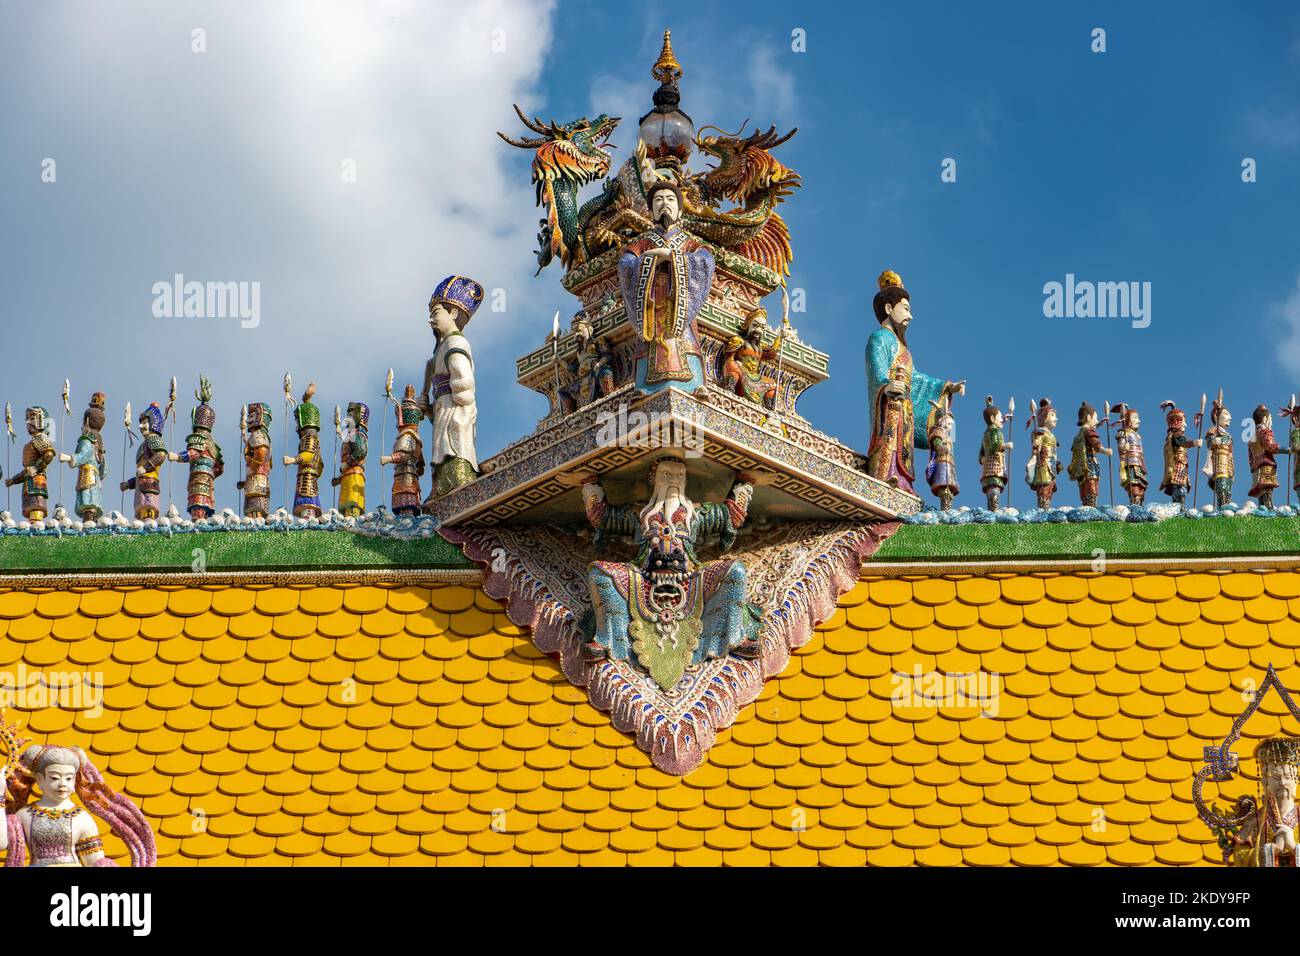 Figurative decoration on top of roof of Buddhist temple with blue sky, Wat Pariwat Bangkok, Thailand Stock Photo